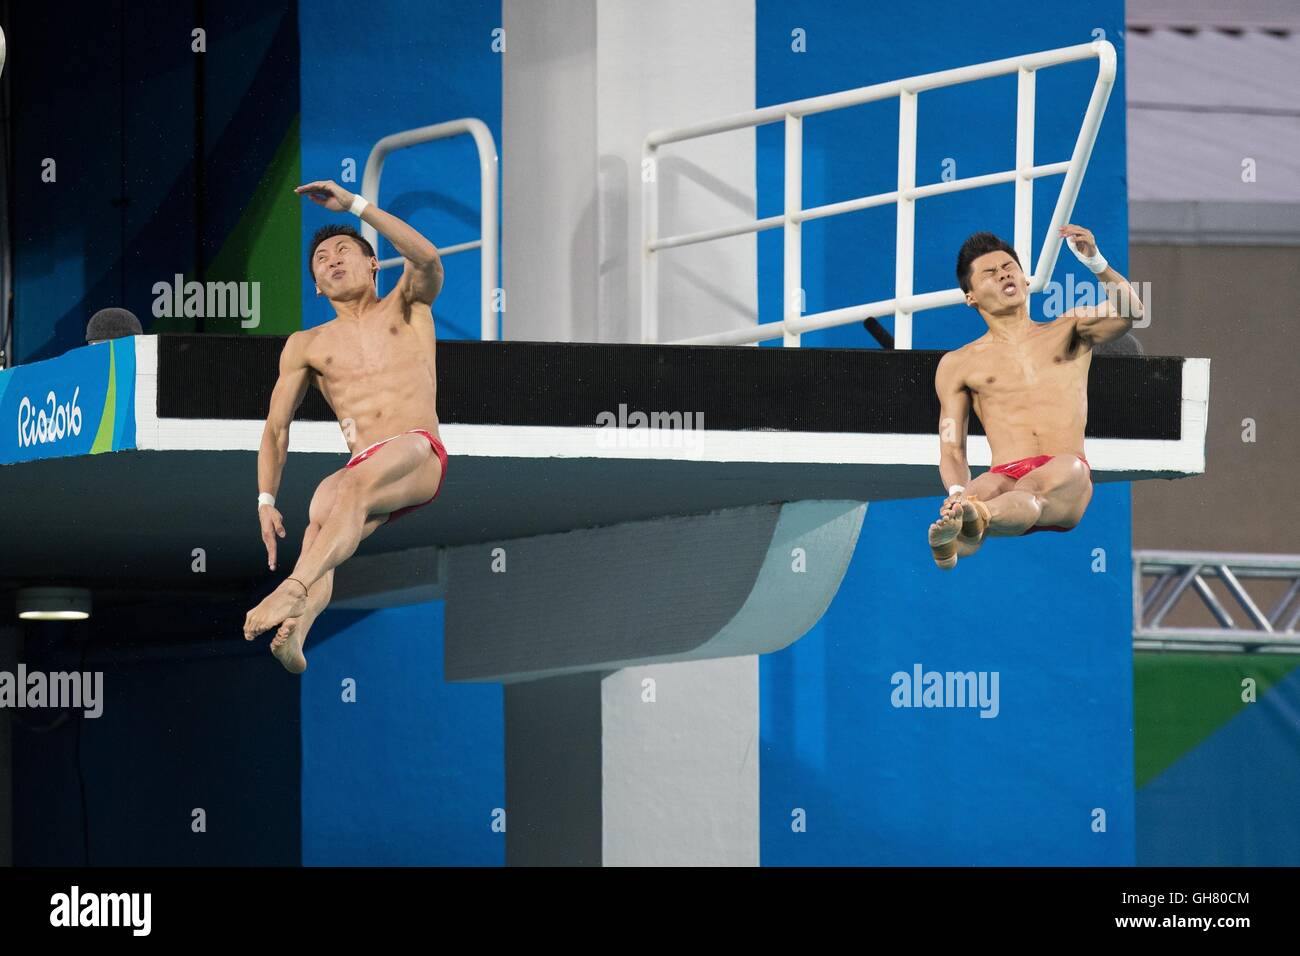 Rio De Janeiro, Brazil. 8th August, 2016. OLYMPICS 2016 DIVING - Chinese CHEN Aisen and LIN Yue during the Diving Rio Olympics 2016 held in the Maria Lenk Aquatic Center. NOT AVAILABLE FOR LICENSING IN CHINA Photo: Marcelo Machado de Melo/Fotoarena/Alamy Live News Stock Photo